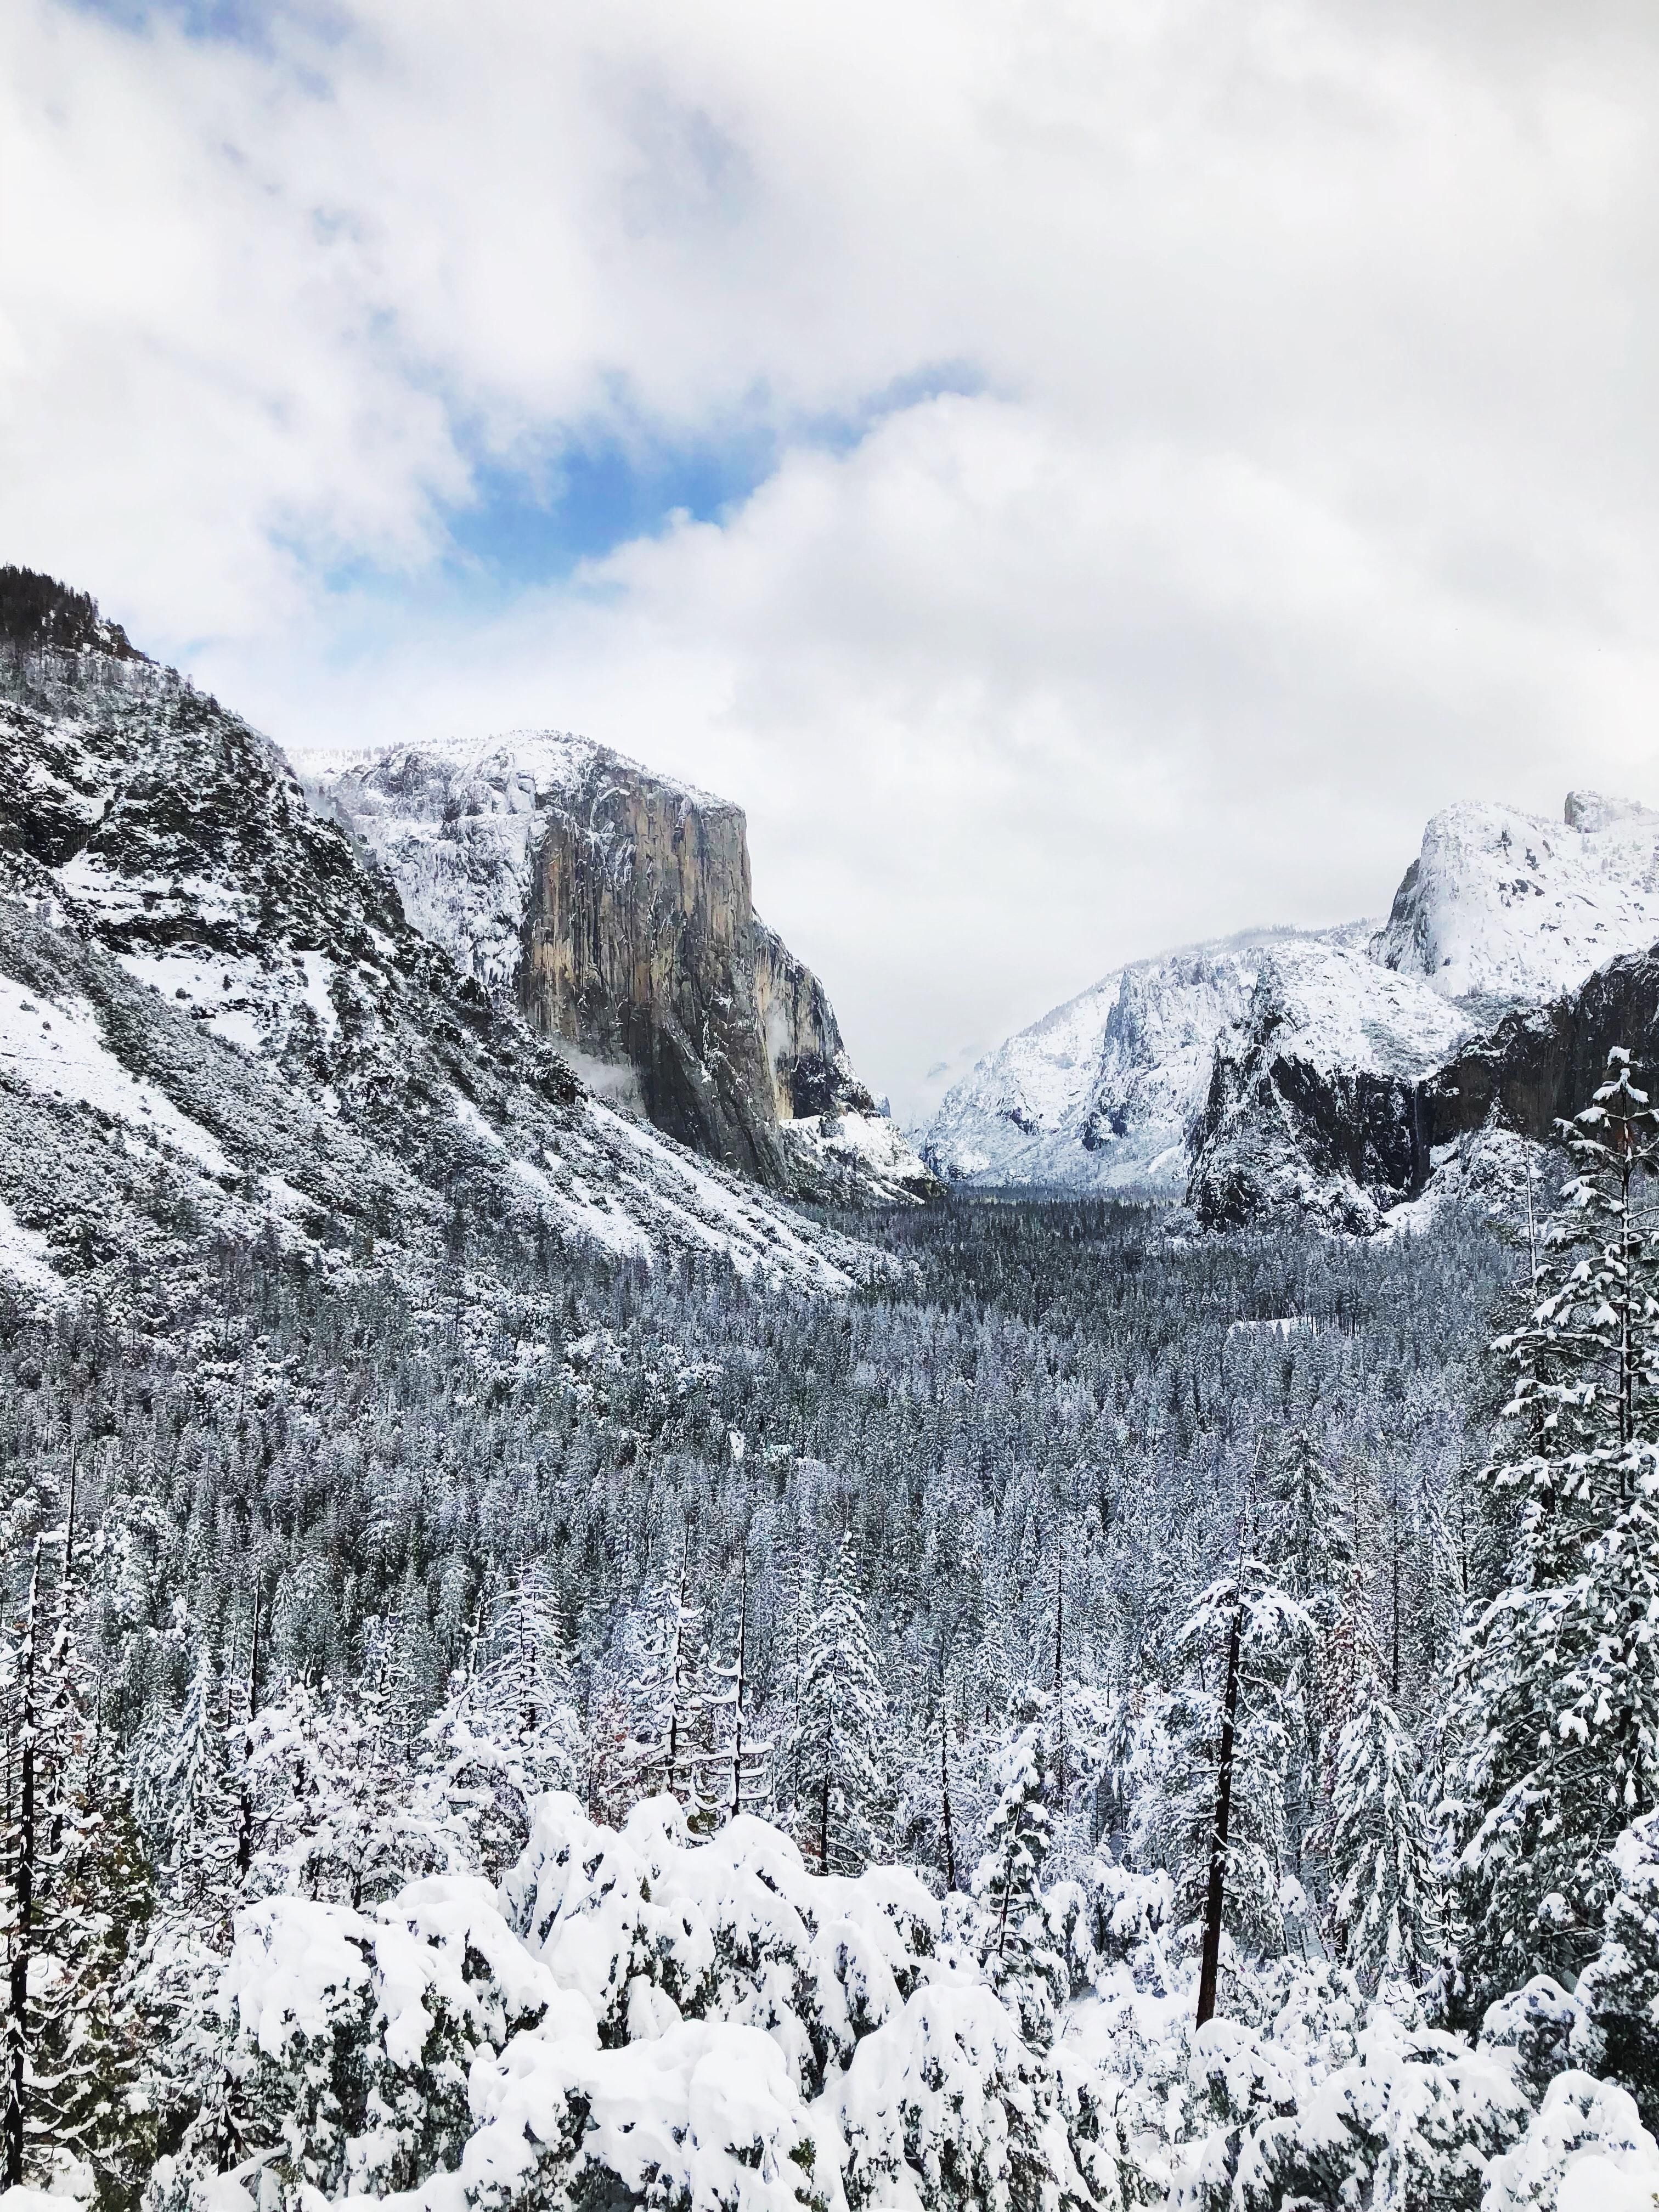 Winter Wonderland: How to Plan a Snowcation to Yosemite National Park